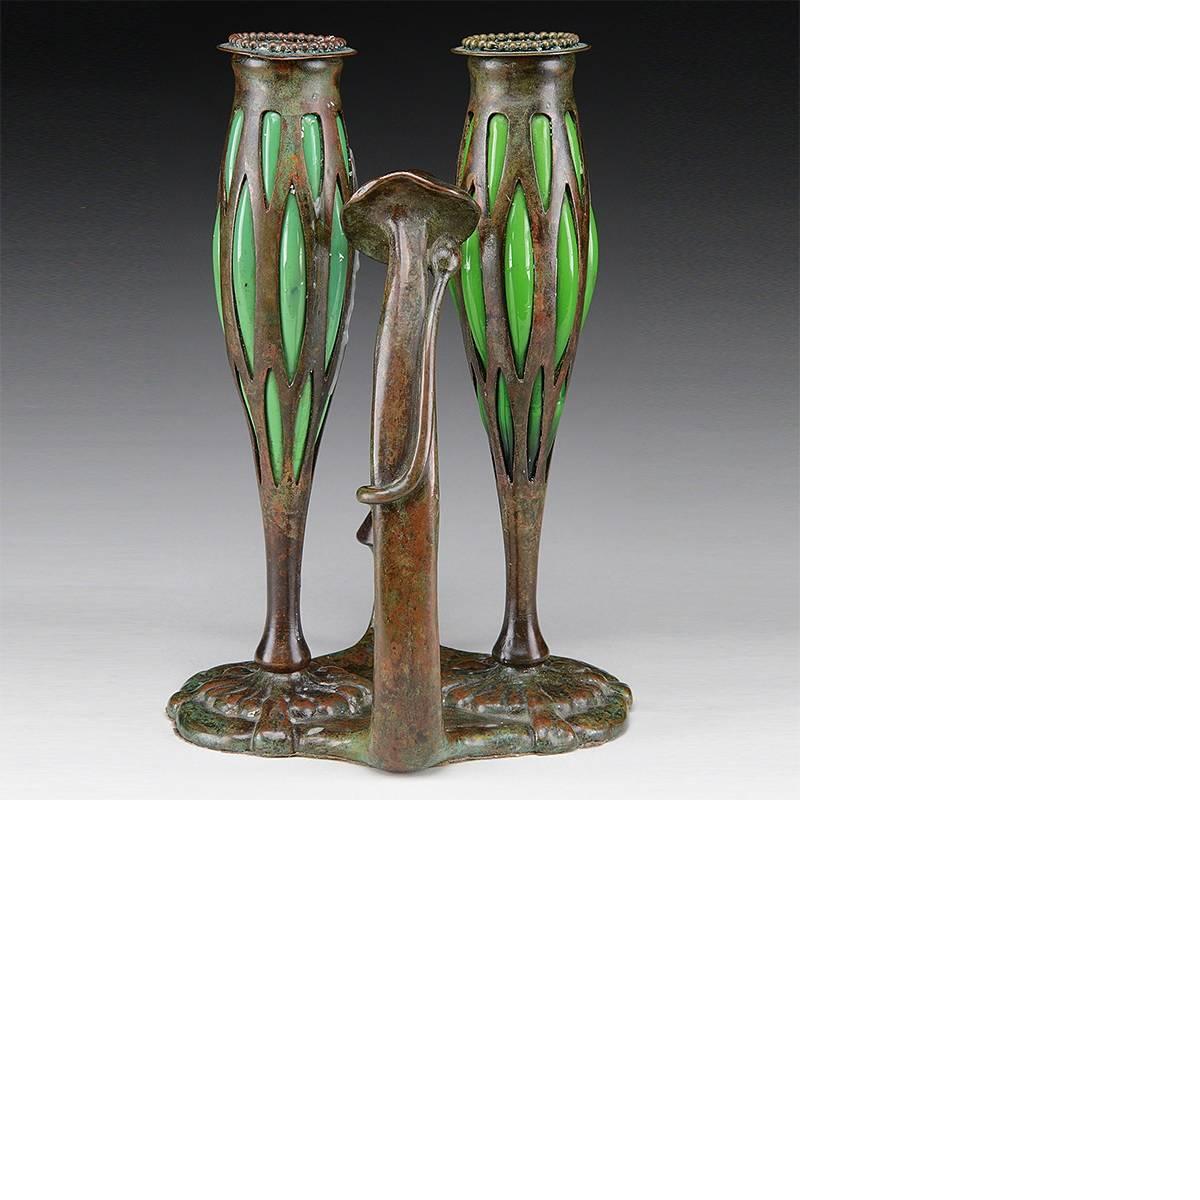 A double blown out glass and patinated bronze candlestick by Tiffany Studios New York. The candlestick features reticulated candle holders with blown-out glass, beaded bobeche tops and tall mushroom bud handle and snuffer stand with a snuffer, circa